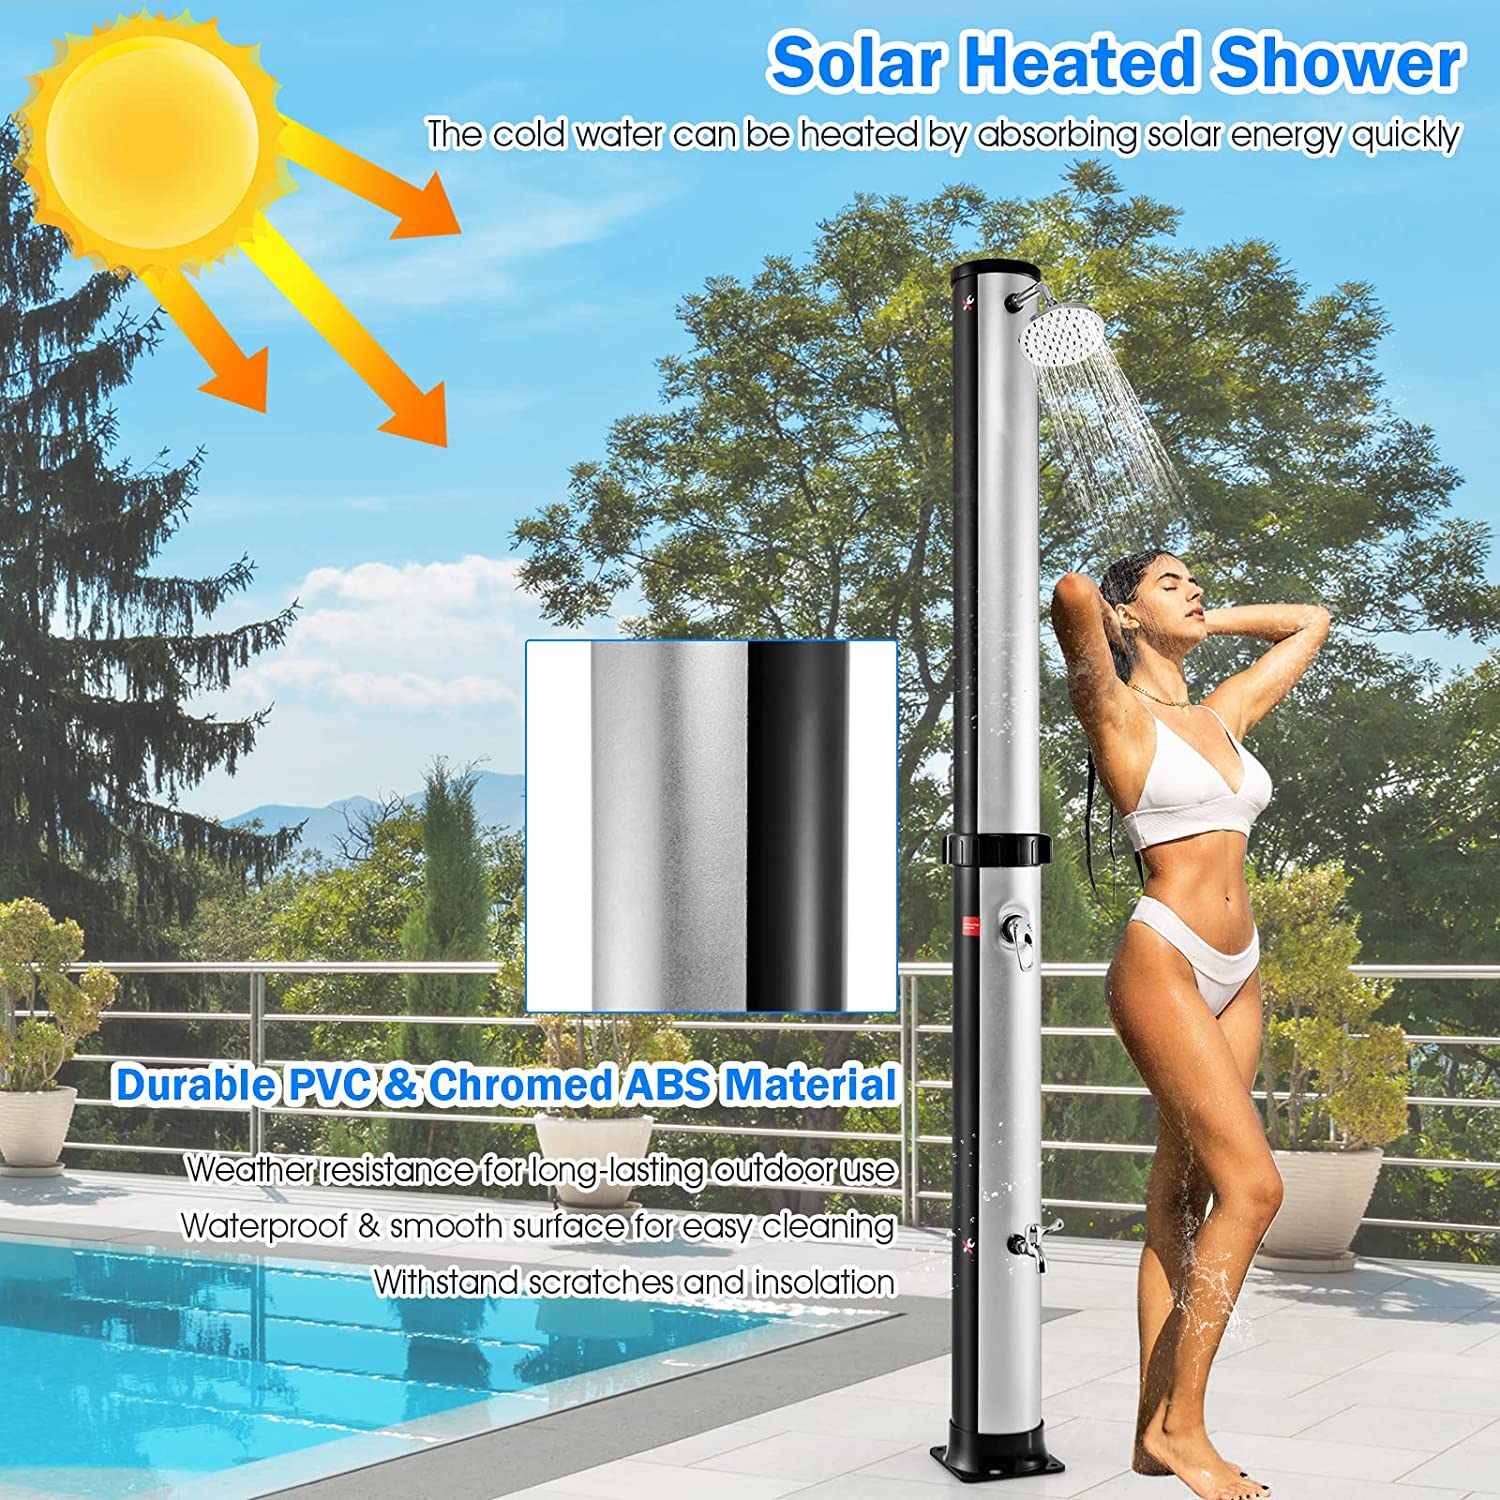 Chairliving 7.2FT Outdoor Solar-Heated Shower 10 Gallon 2-Section Pool Shower with Free-Rotating Shower Head Foot Tap Spigot